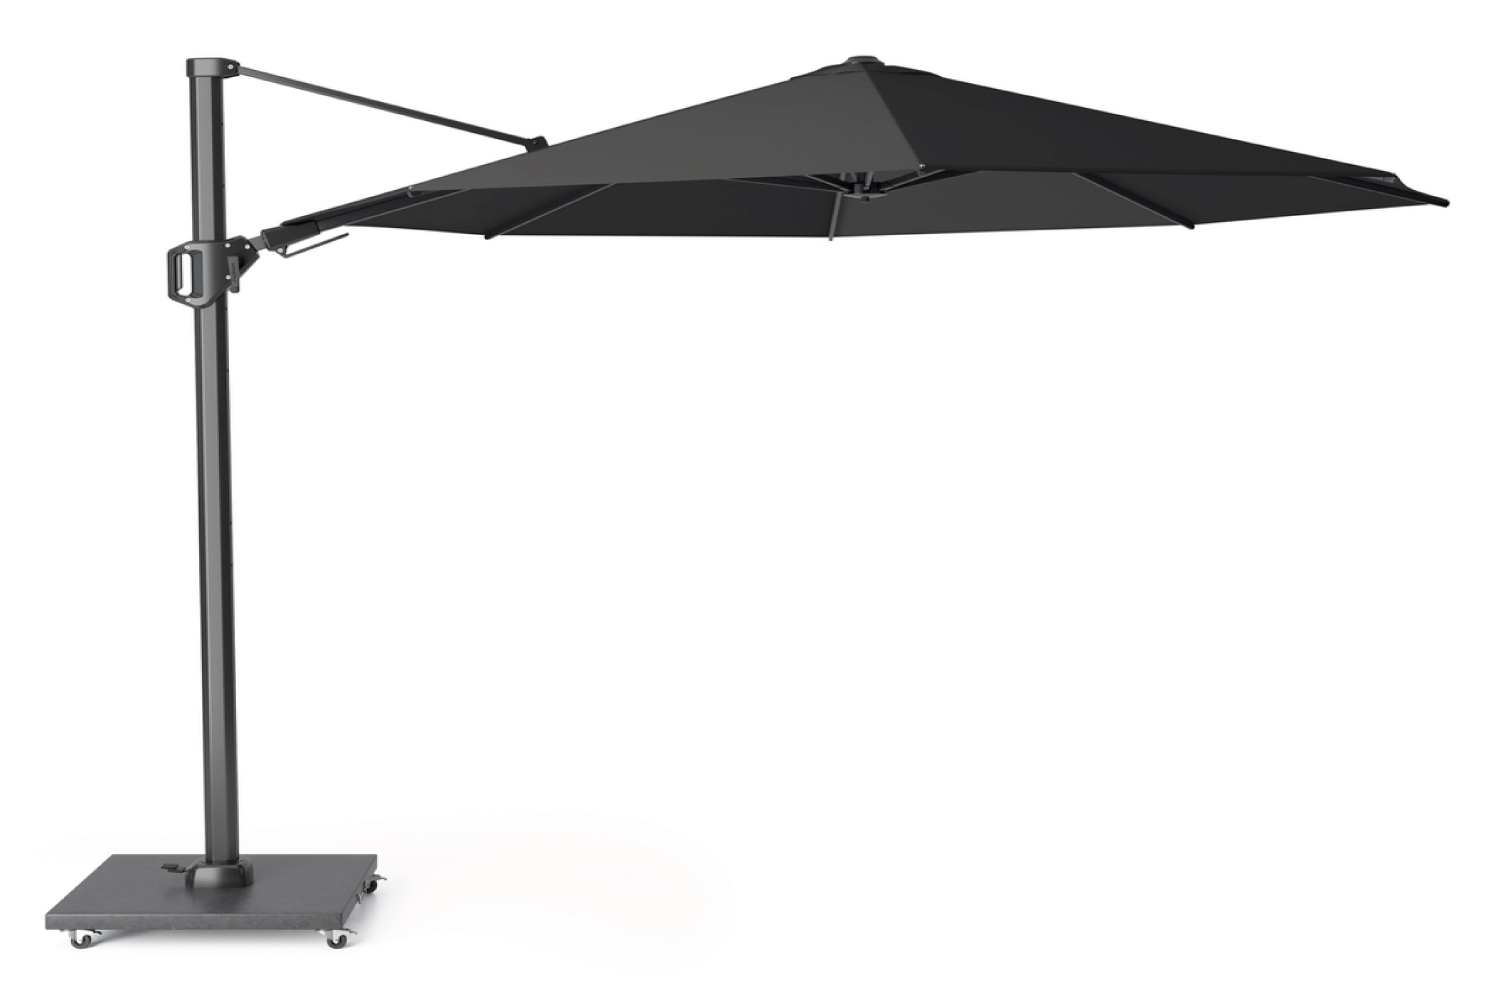 challenger 350 rond faded black - Platinum Challenger zweefparasol 350 cm rond faded black